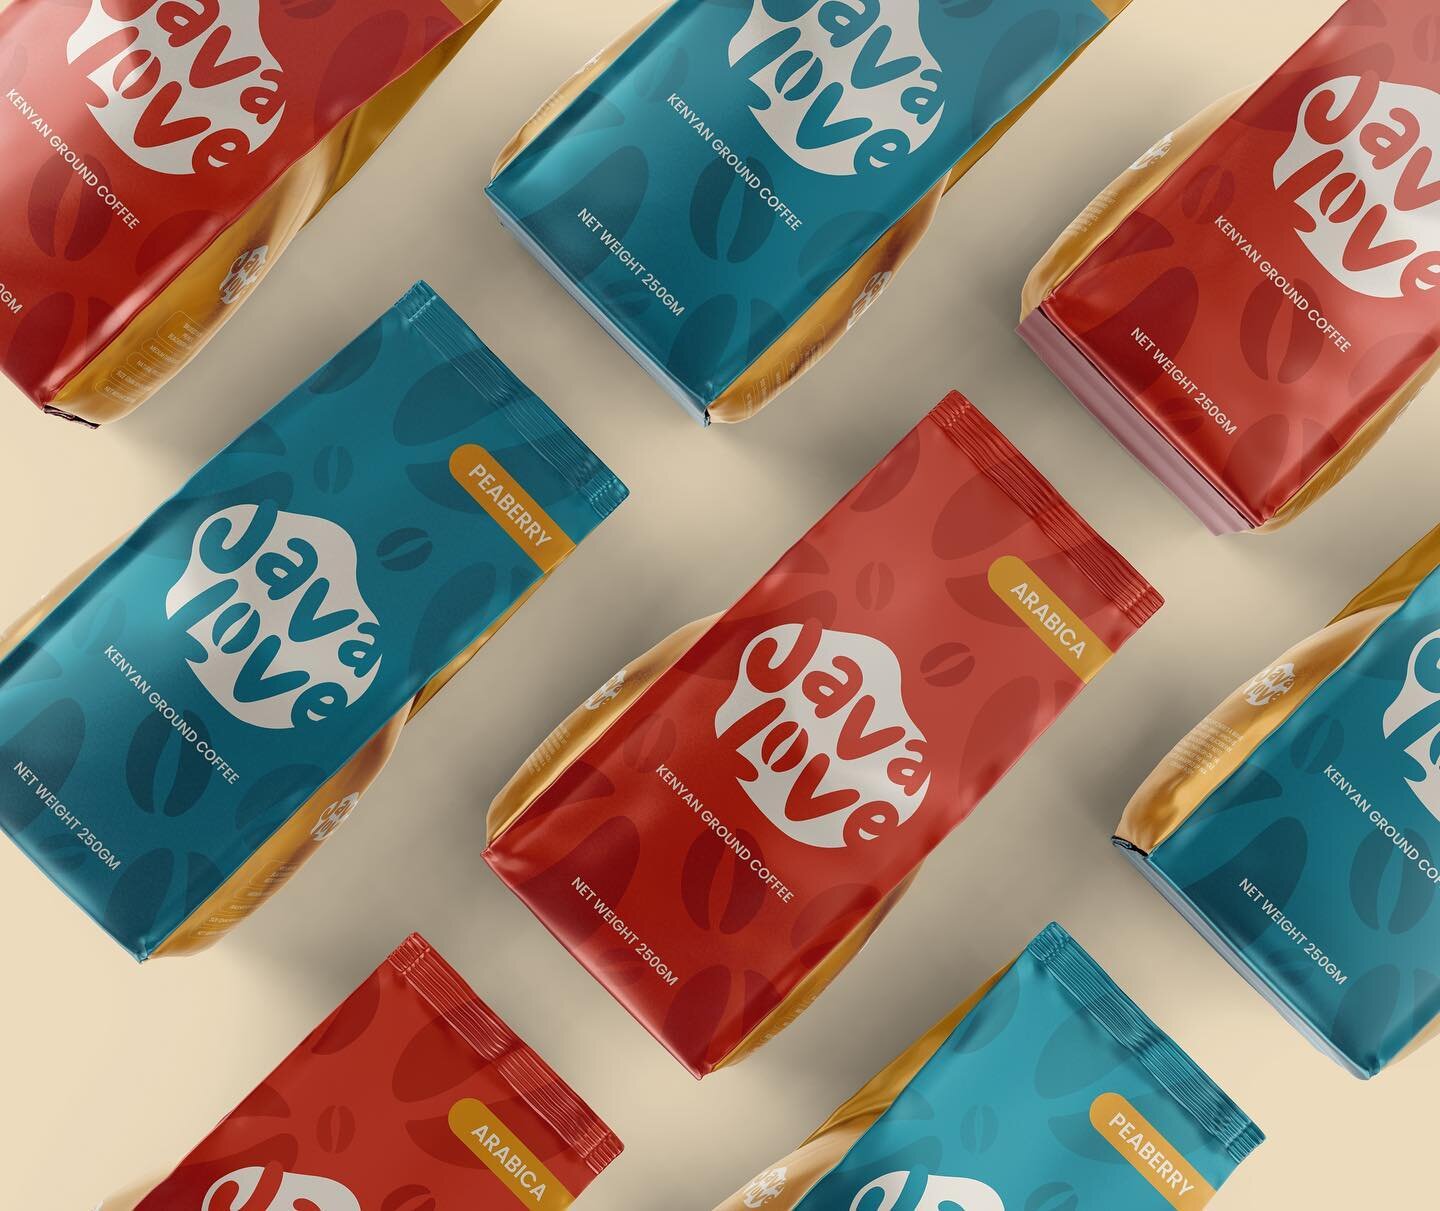 A harmonious packaging design for a sustainable coffee company, established in Kenya, called Java Love.

The rich, vibrant colour palette, inspired by the sun, sea and earth, is impactful, grabbing the consumers attention instantly.

Products include